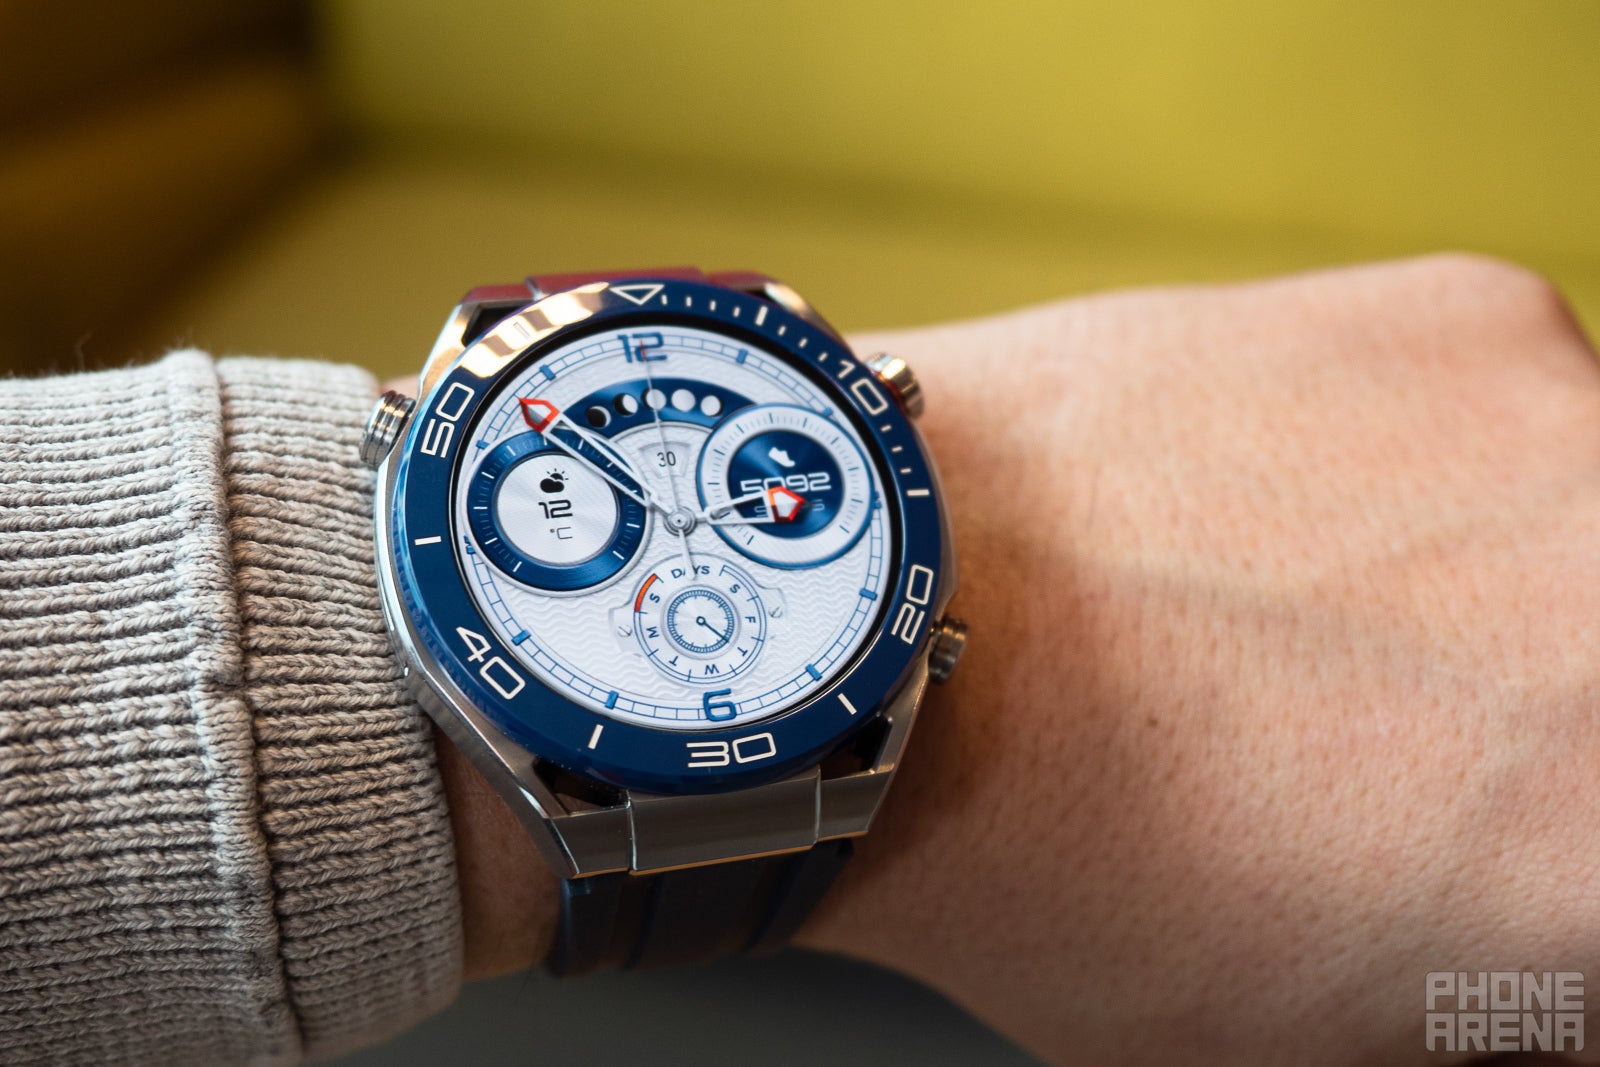 Huawei WATCH Ultimate blends style and smarts - GadgetMatch